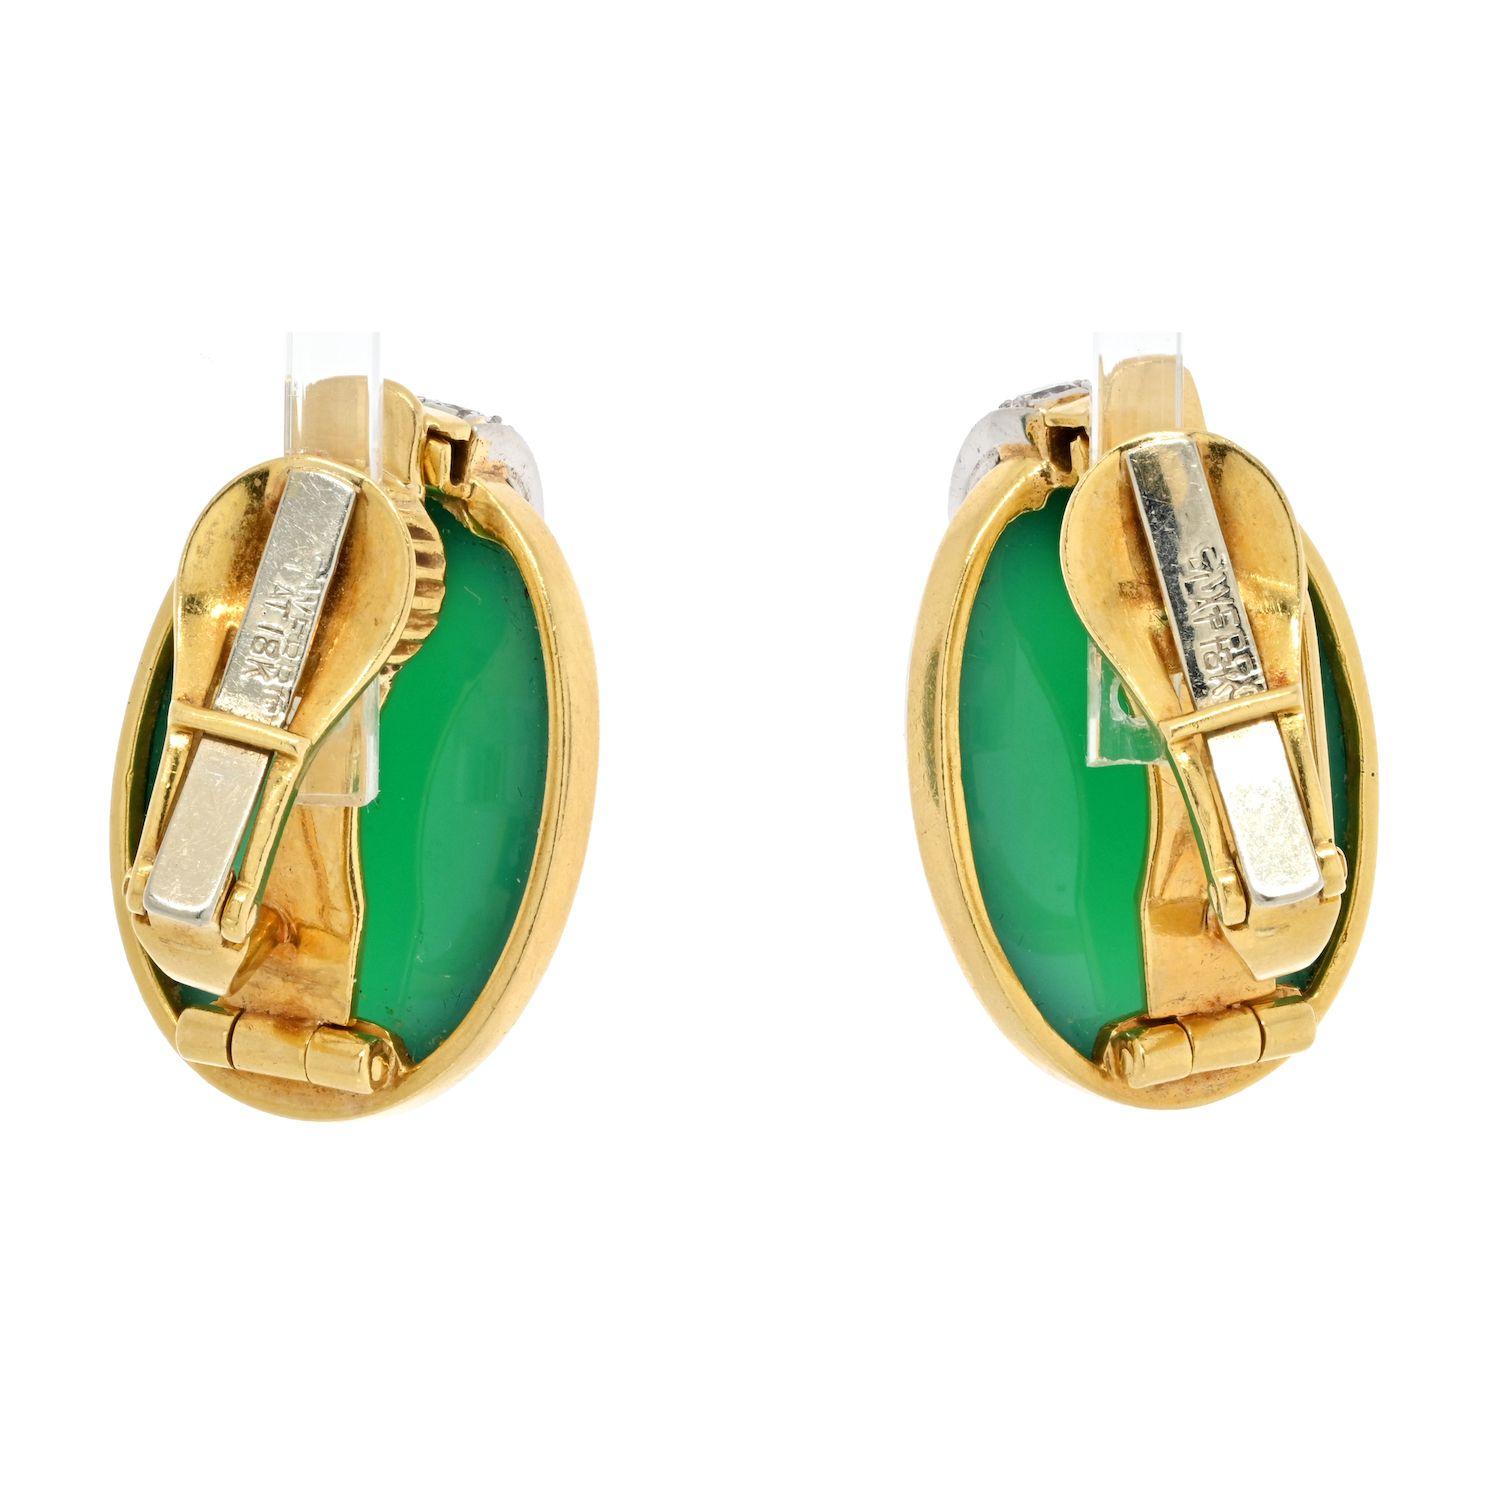 Lovely and easy to wear this pair of David Webb 18K Yellow Gold Oval Cabochon Green Chrysophase And Diamond Clip Earrings is a perfect choice for the Holidays. 
Impressive like every David Webb pair of earrings but not overwhelming. 
You will love